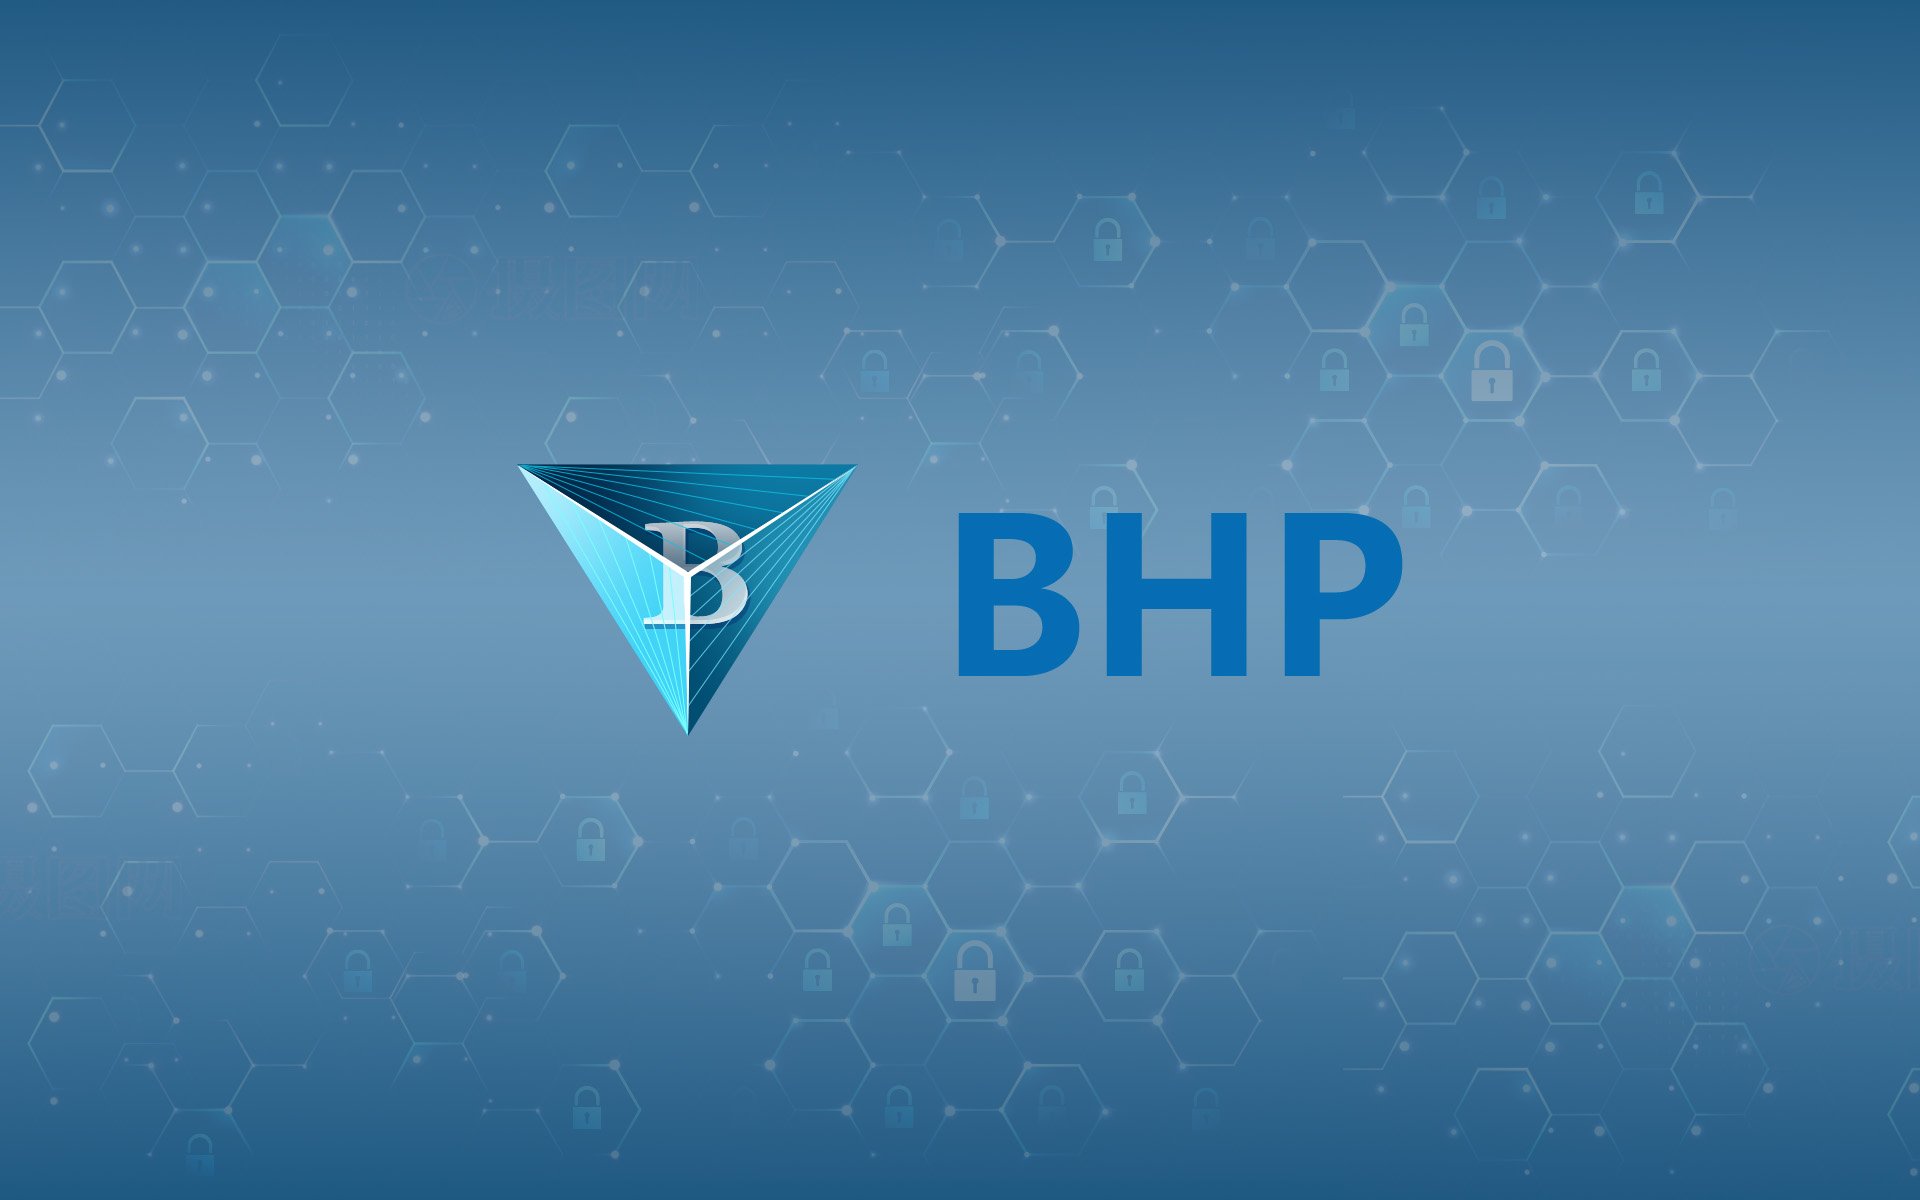 BHP Financial Group - Hash Power trusted Fintech